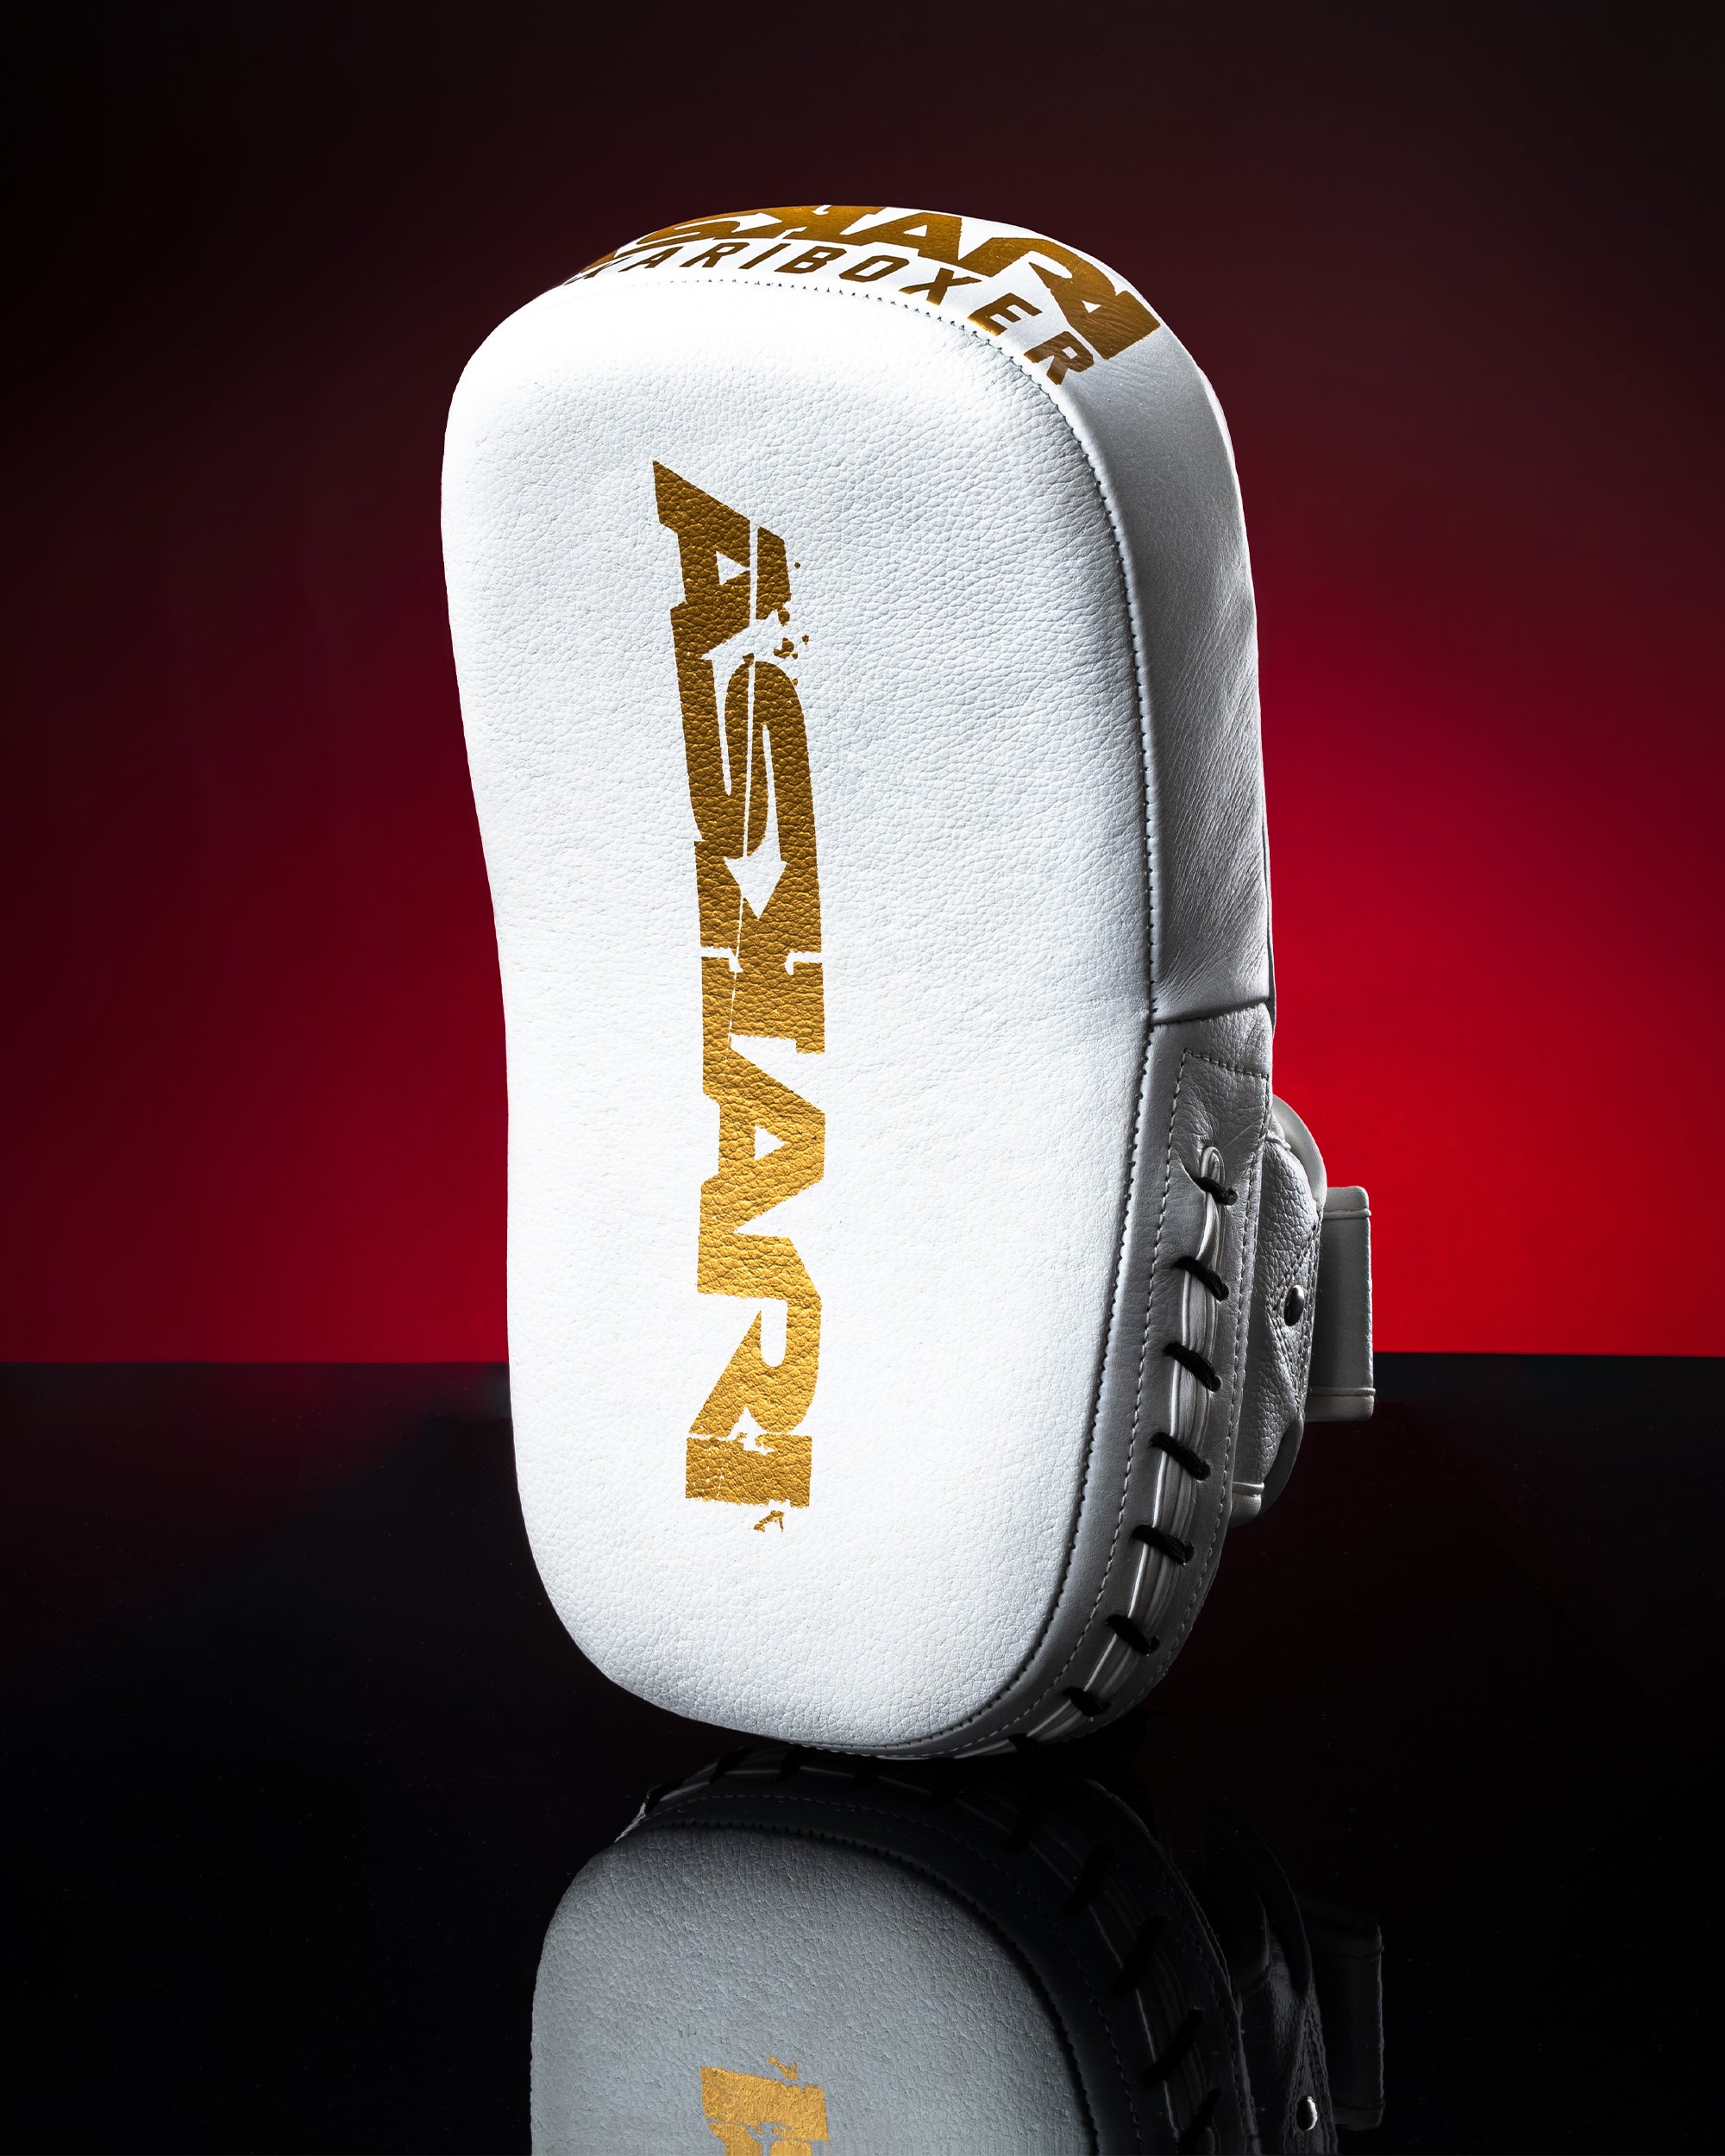 BKB BAREKNUCKLE BOXING PADS AIR PADS FOR BOXING